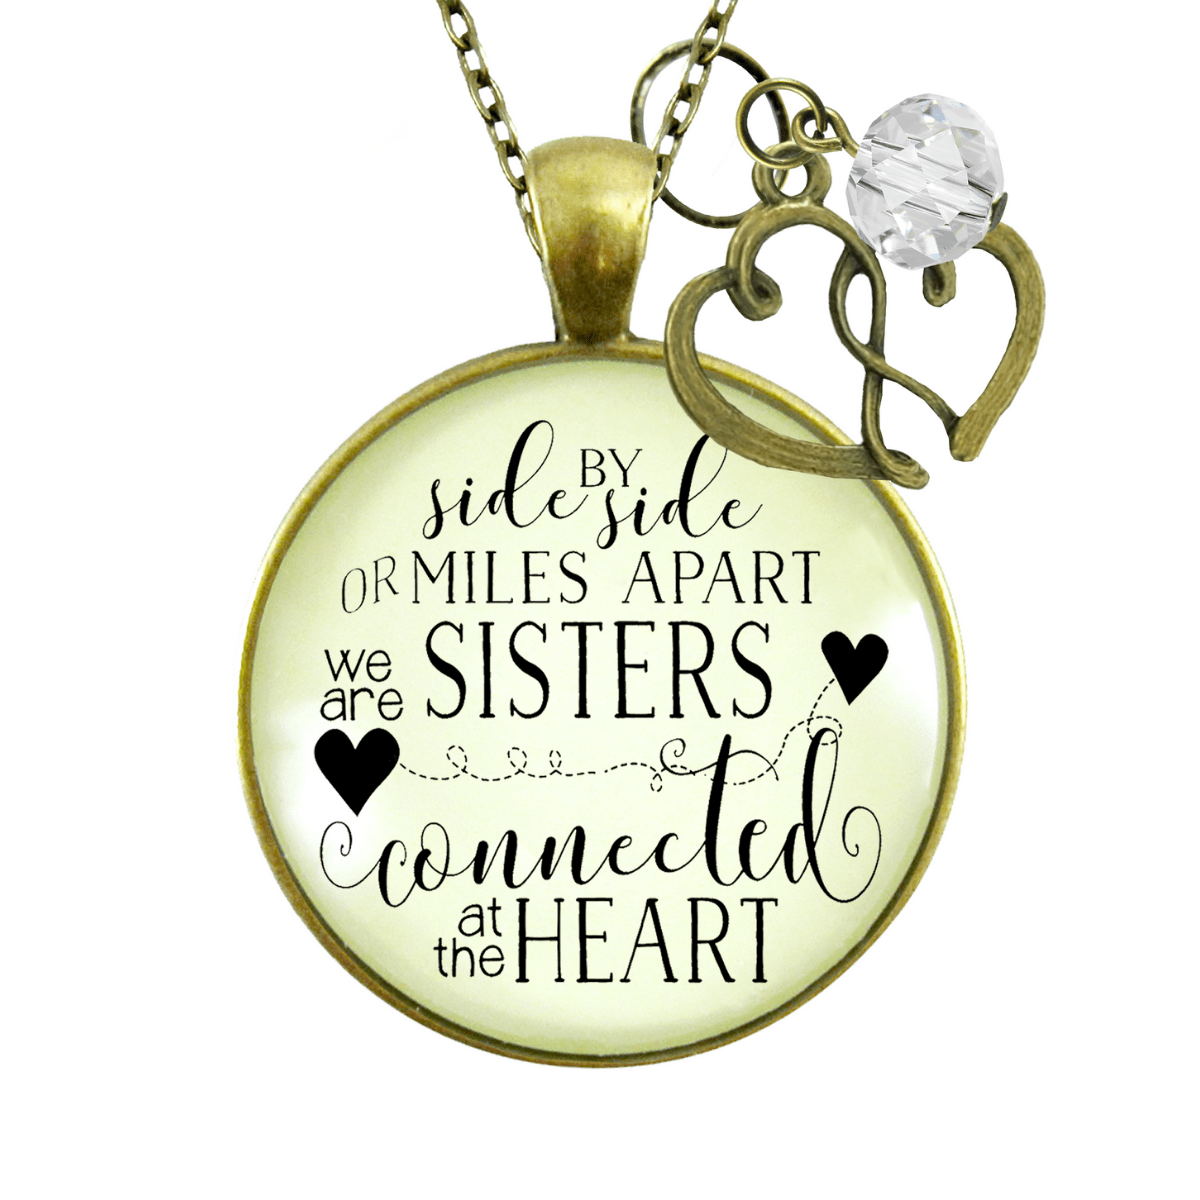 Gutsy Goodness Love My Sister Necklace Side by Side Long Distance BFF Jewelry Gift - Gutsy Goodness;Love My Sister Necklace Side By Side Long Distance Bff Jewelry Gift - Gutsy Goodness Handmade Jewelry Gifts